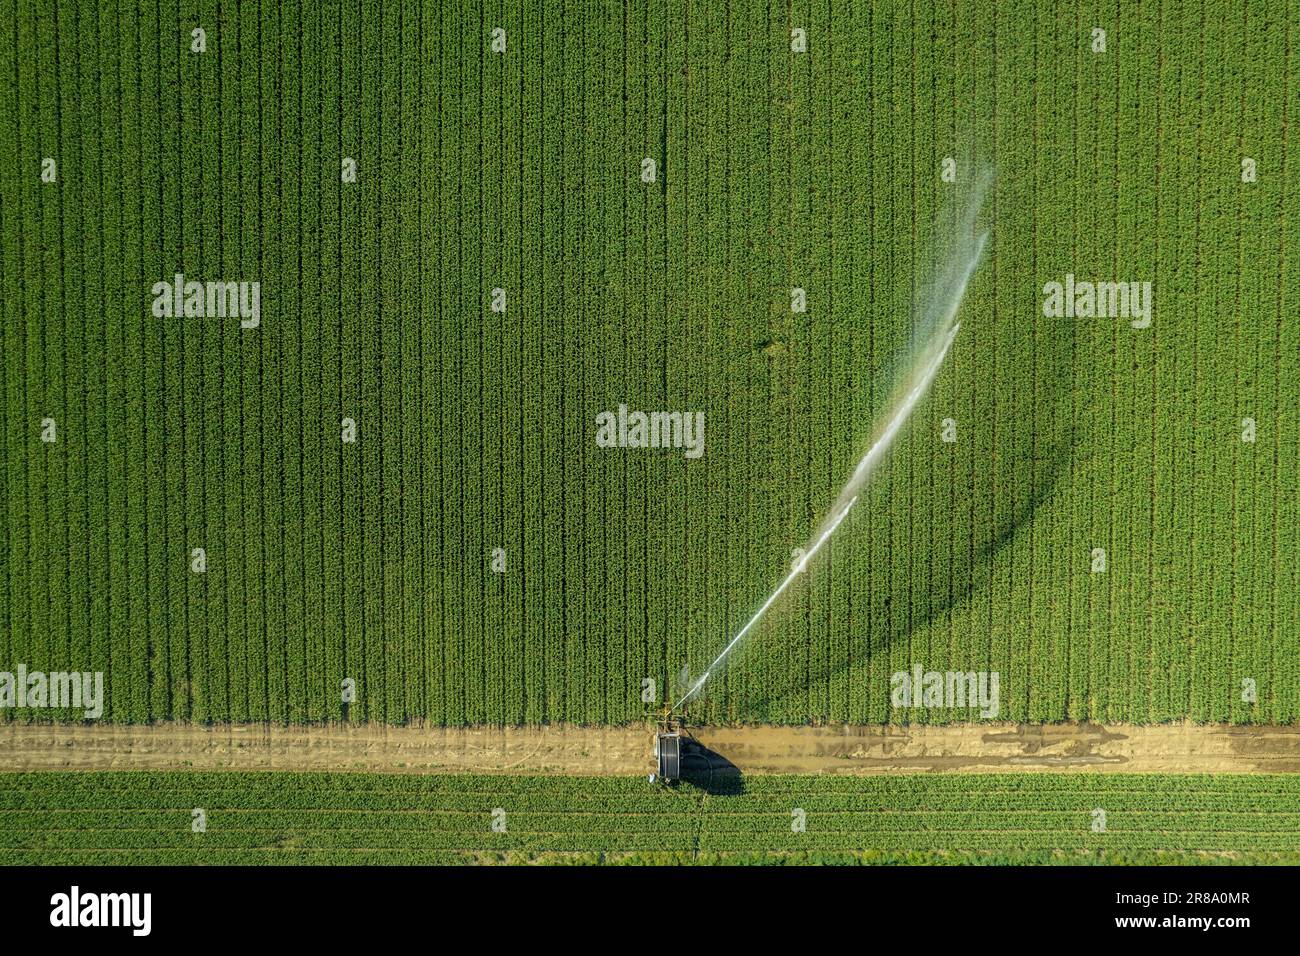 Irrigation System For Watering Of Agricultural Crops With A Big